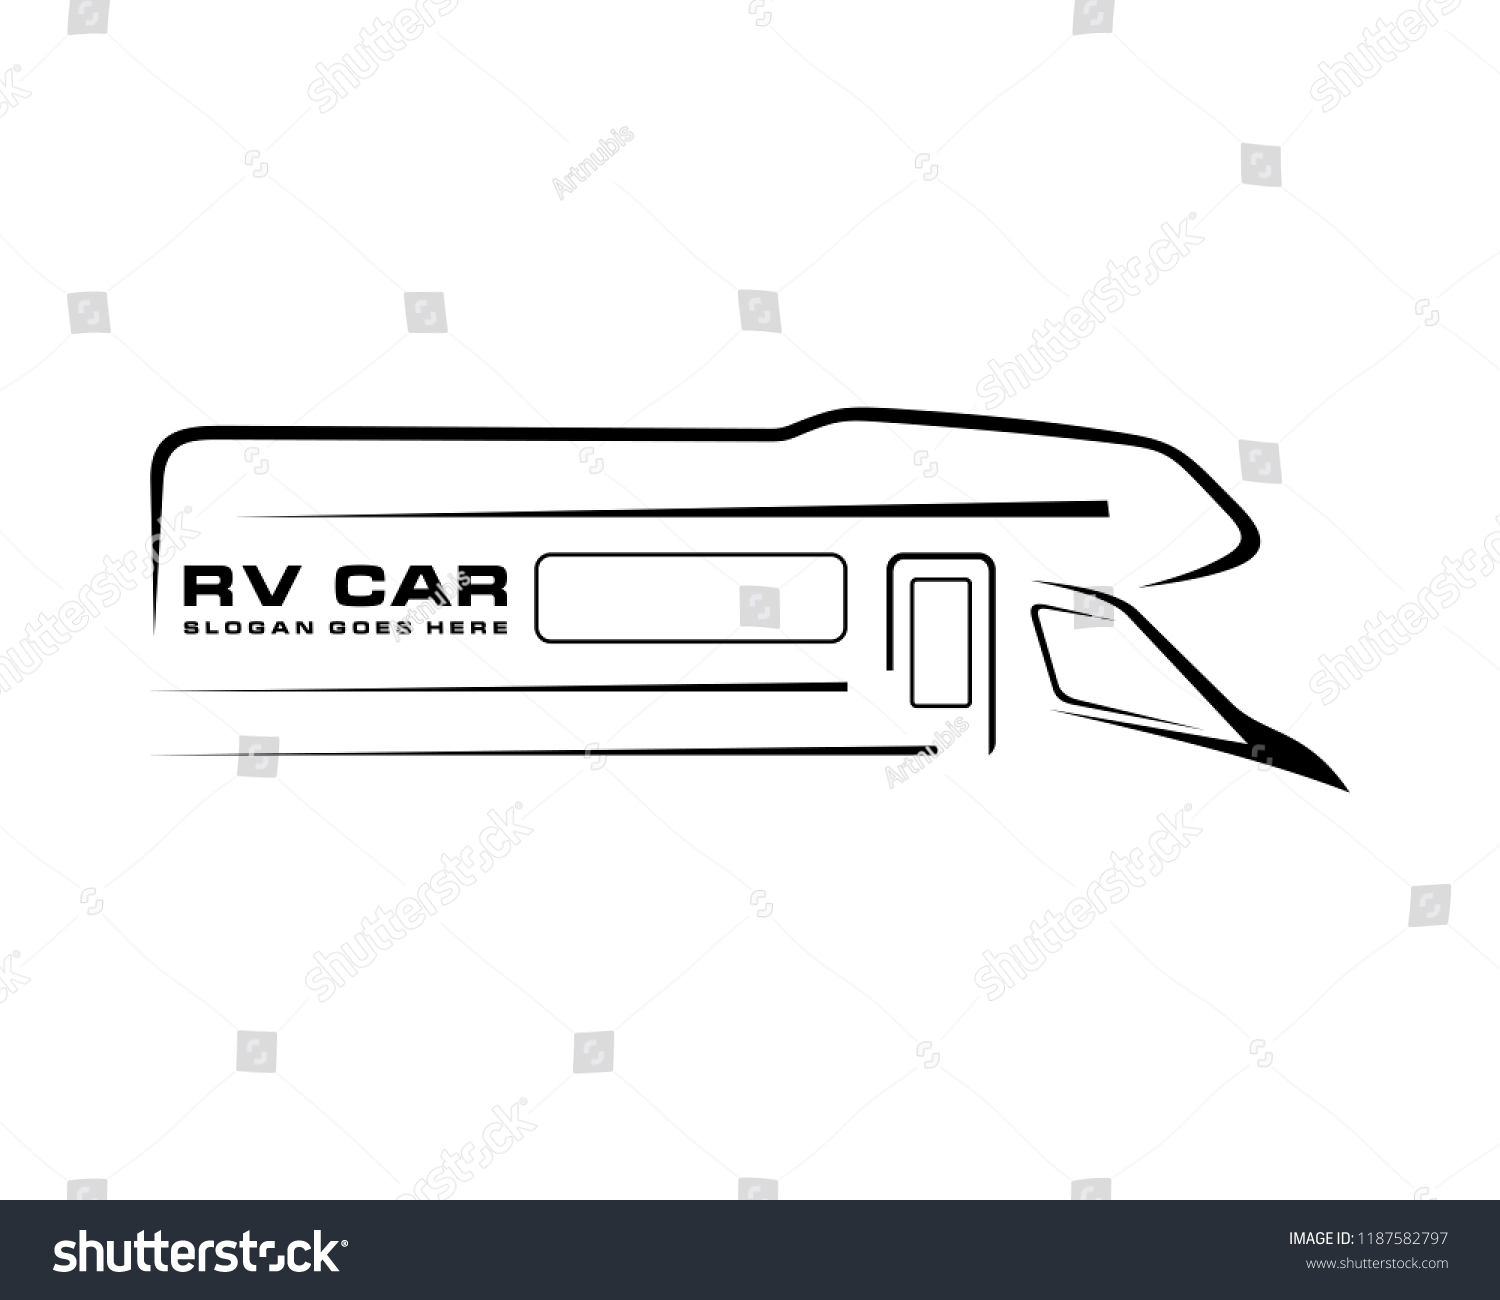 RV car silhouette abstract logo template vector - Royalty Free Stock ...